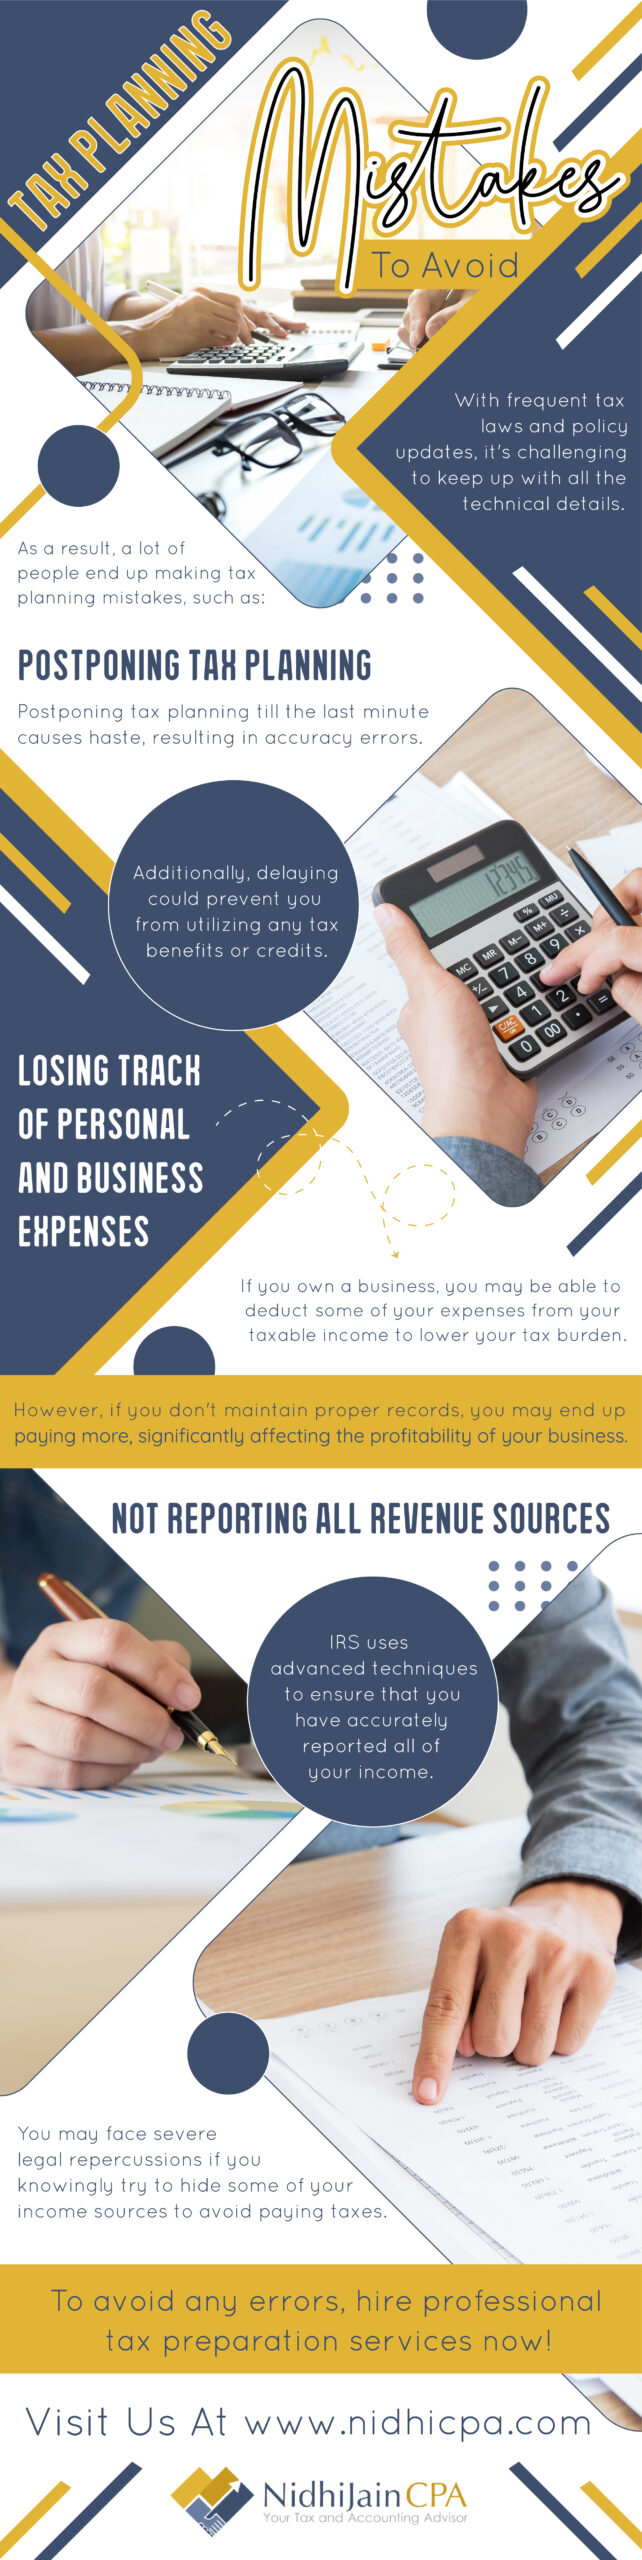 Tax Planning Mistakes To Avoid